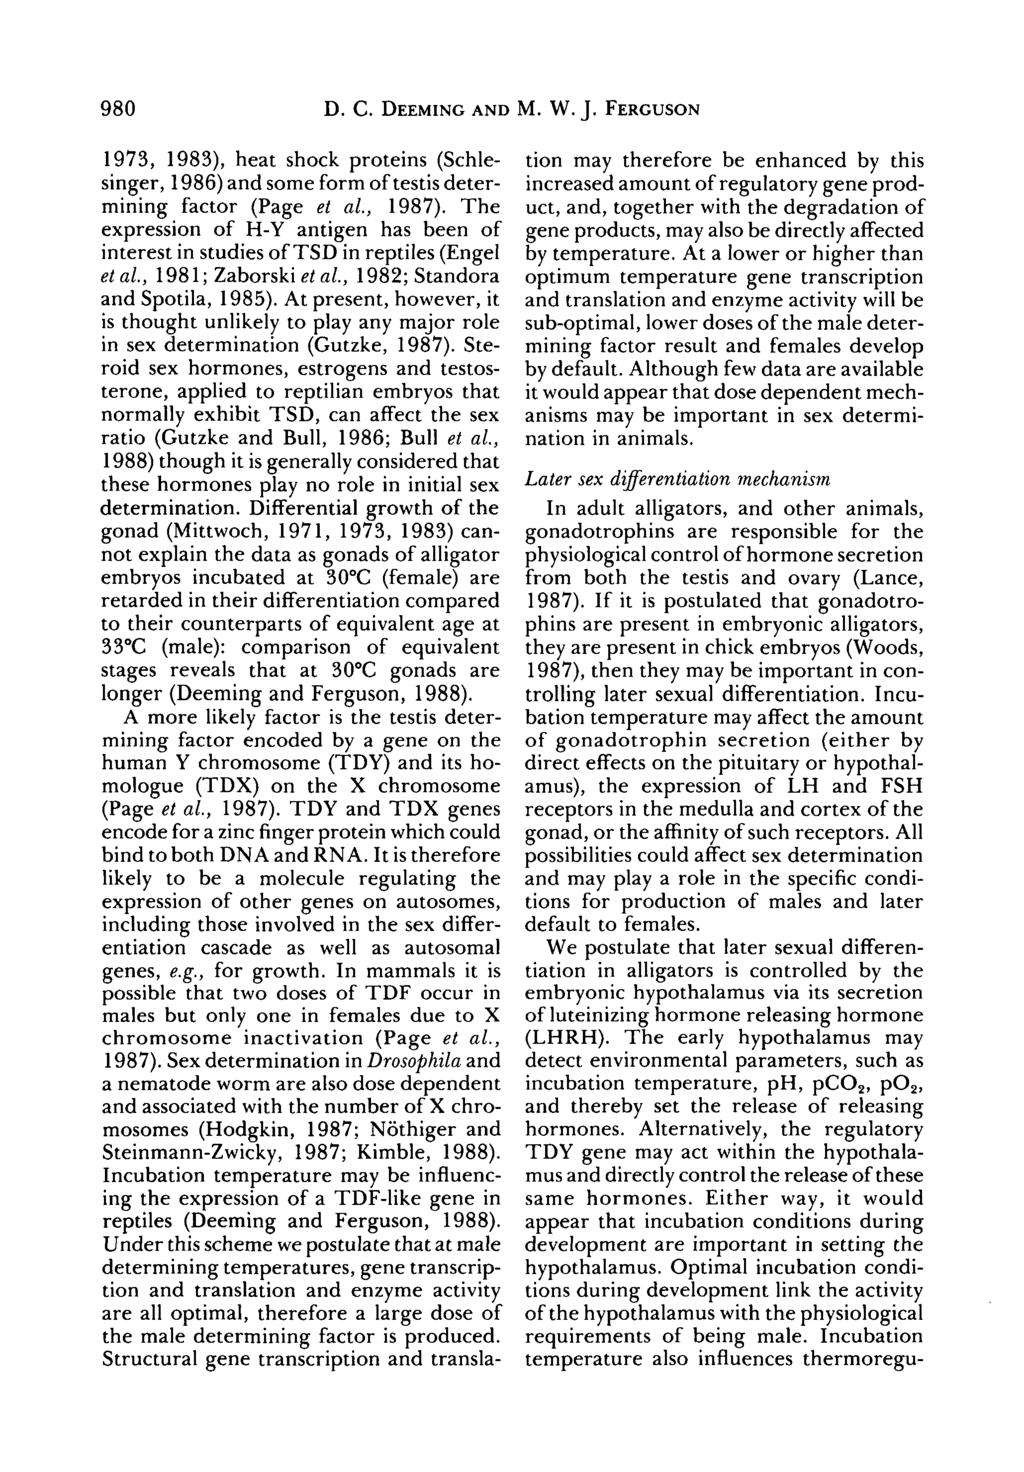 98 D. C. DEEMING AND M. W. J. FERGUSON 1973, 1983), heat shock proteins (Schlesinger, 1986) and some form of testis determining factor (Page et al, 1987).